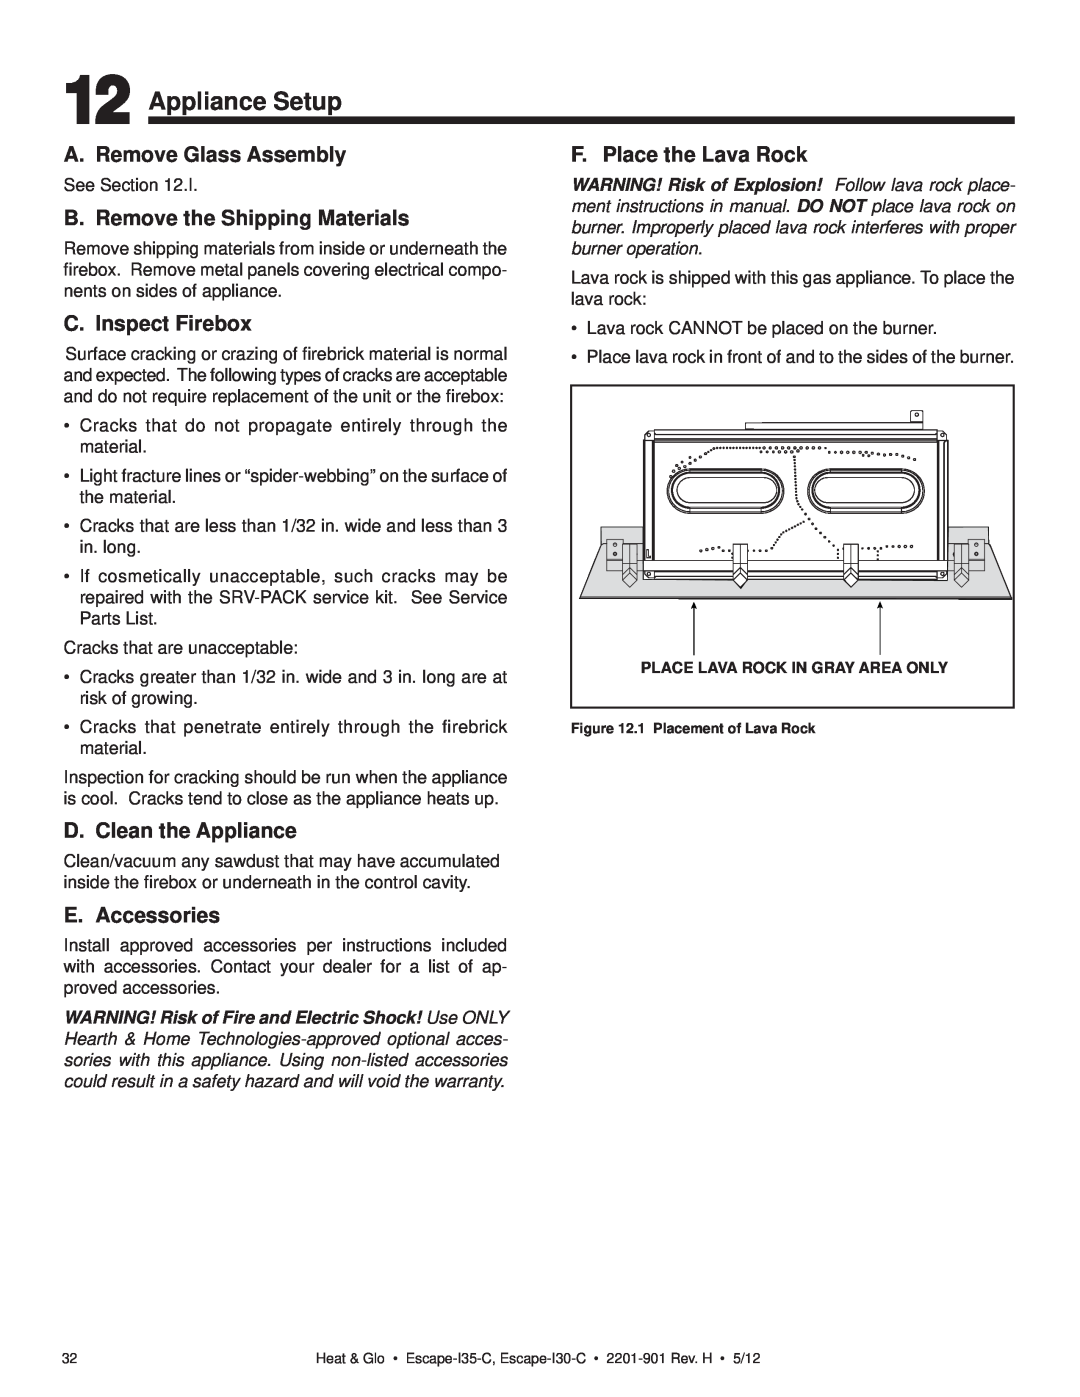 Heat & Glo LifeStyle ESCAPE-I35-C owner manual Appliance Setup, A. Remove Glass Assembly, B. Remove the Shipping Materials 